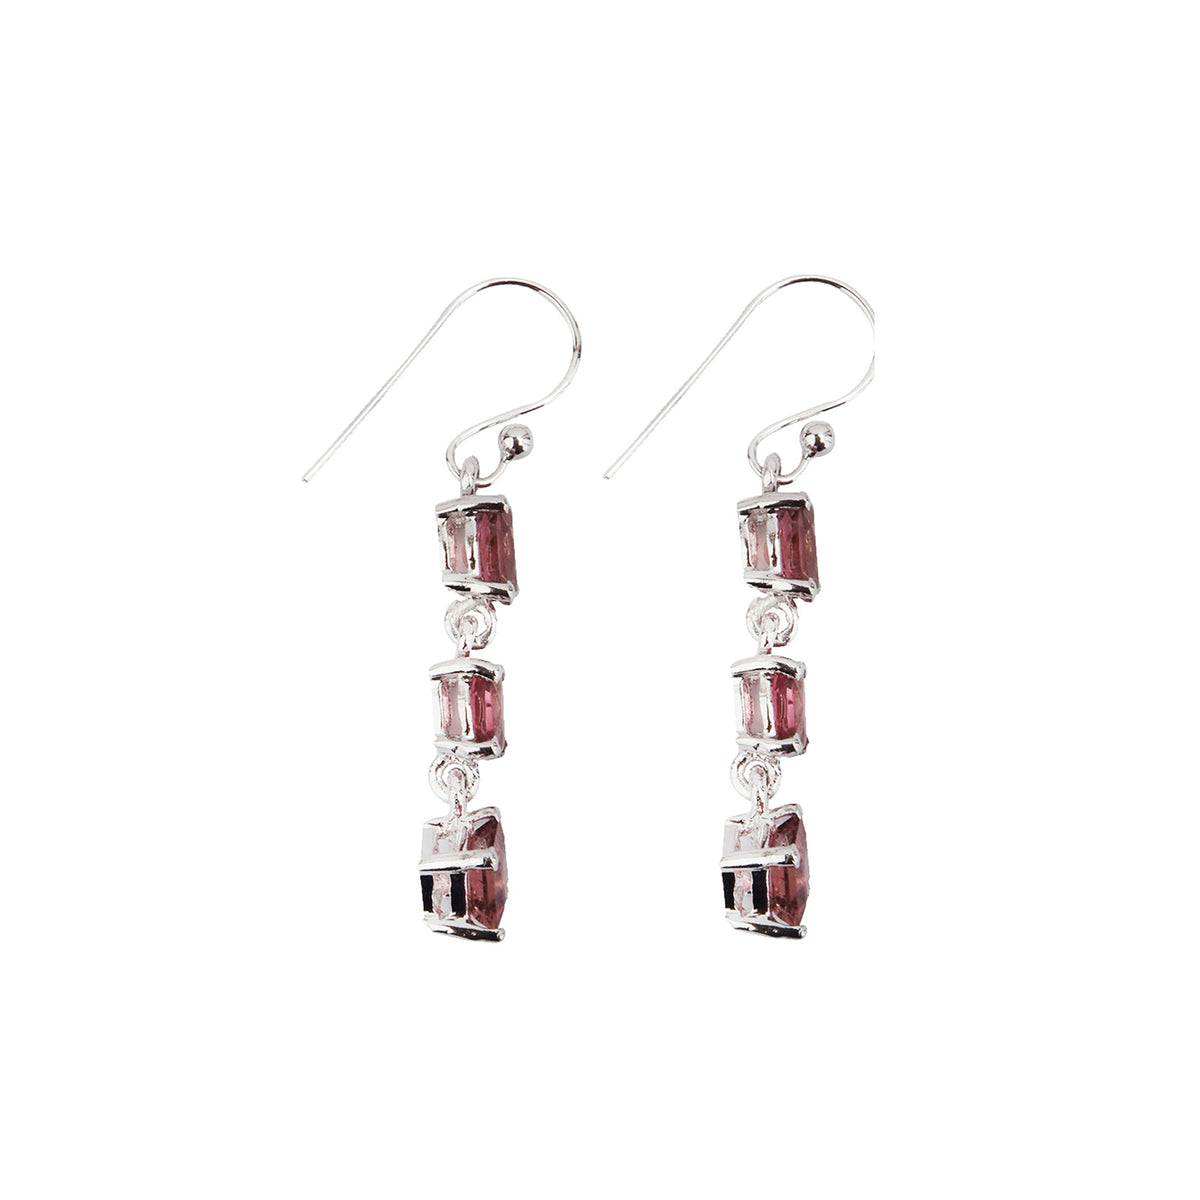 Silver earrings with tourmaline set in prongs